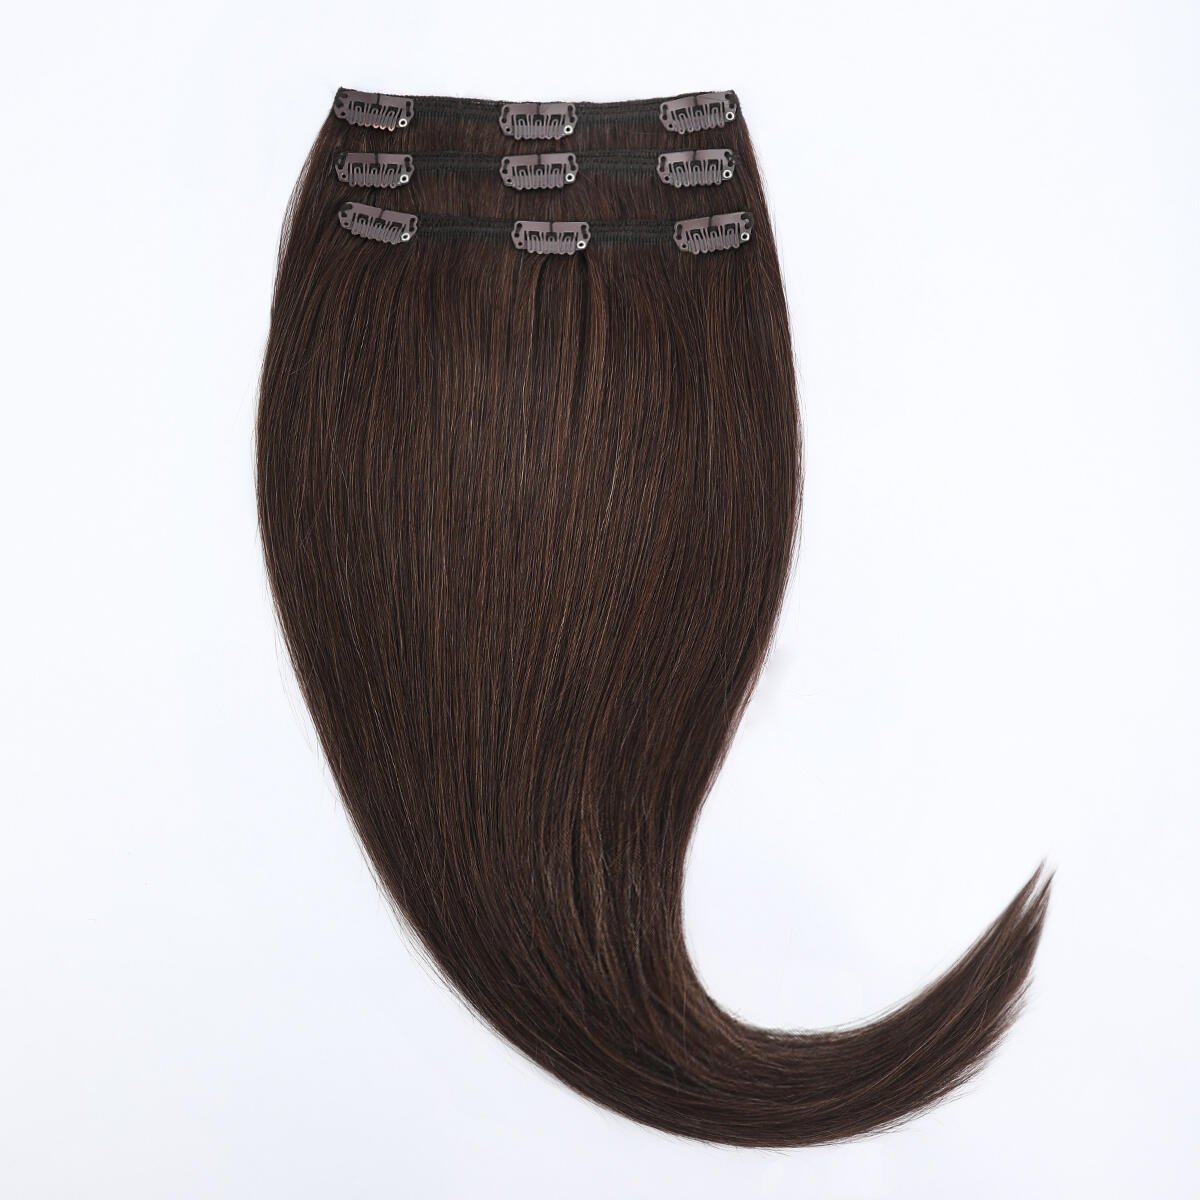 Clip-on set 3 pieces 2.3 Chocolate Brown 70 cm